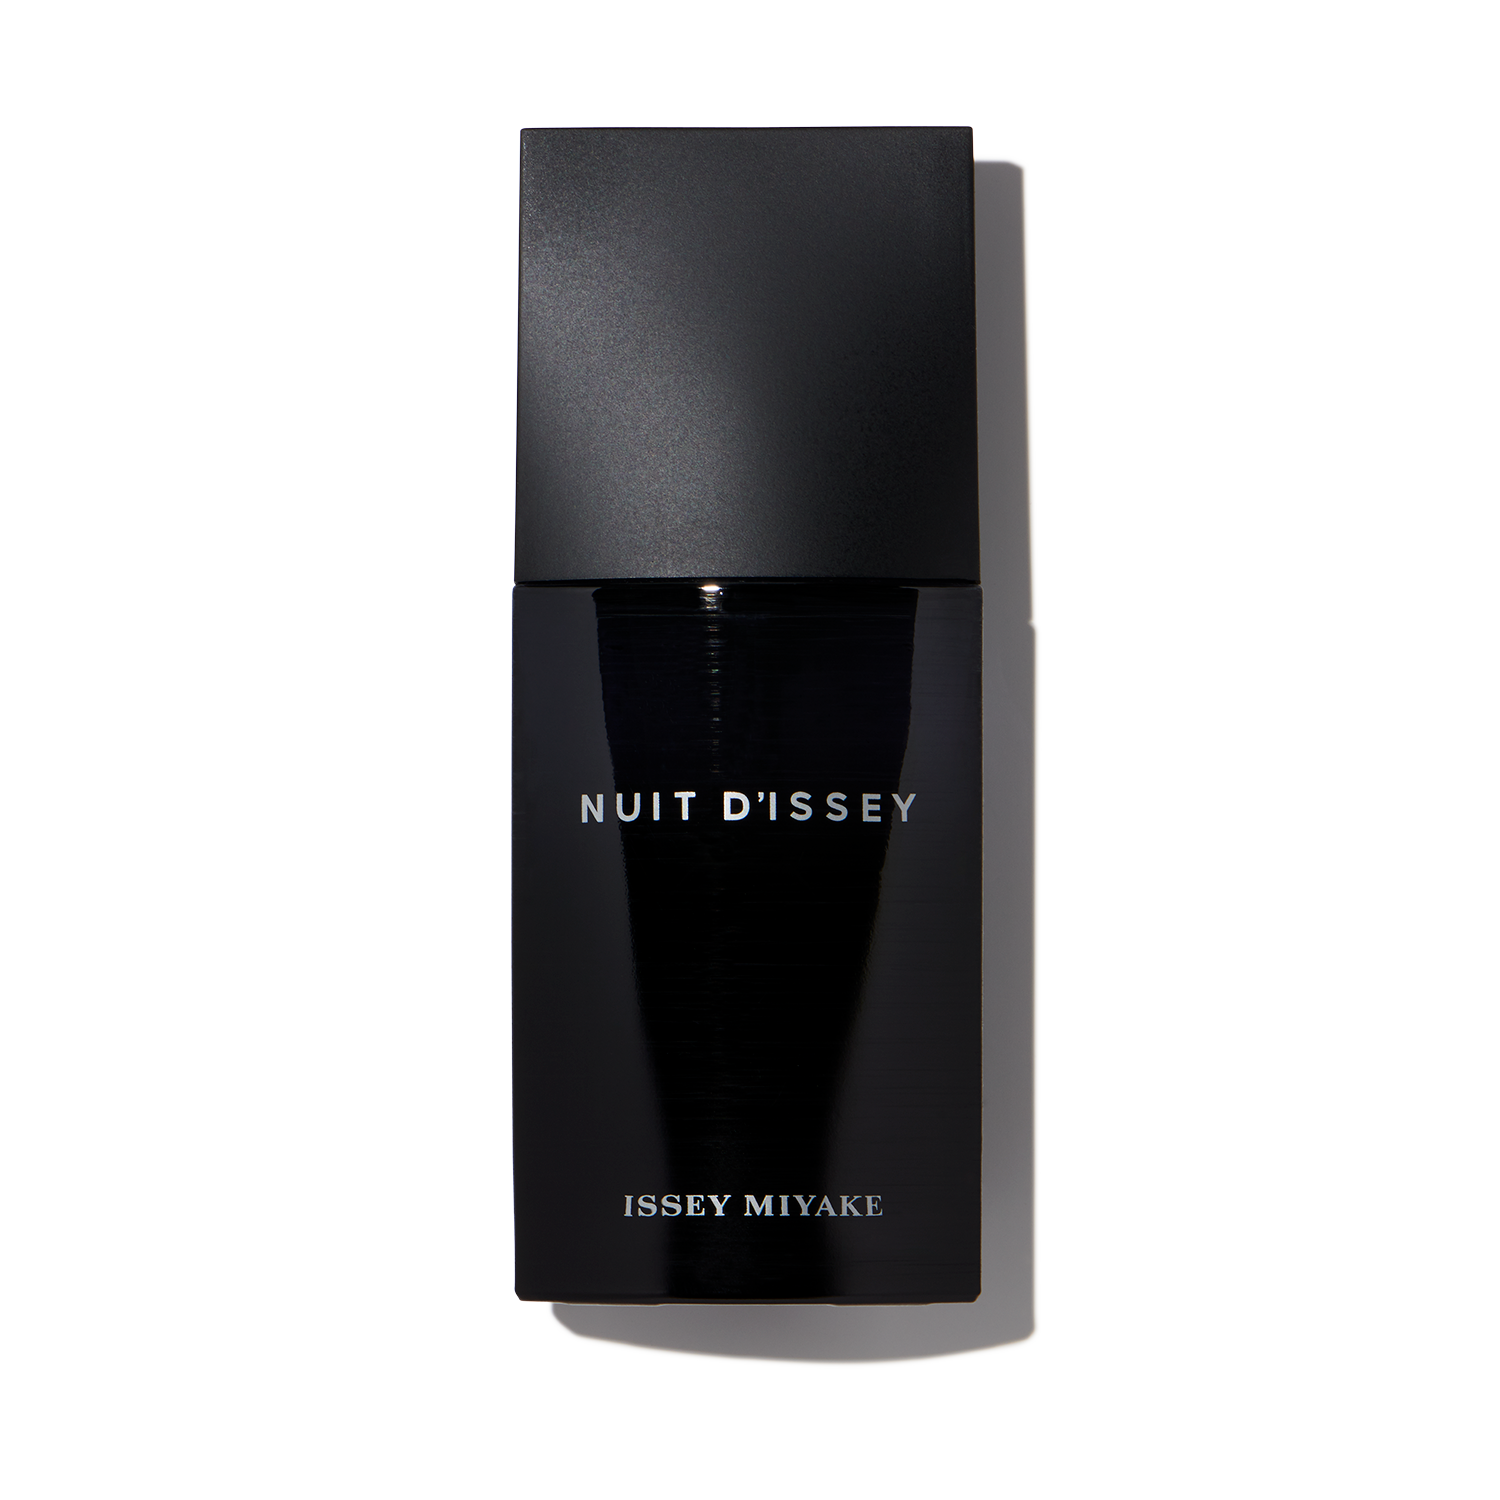 Nuit D'Issey EDT by Issey Miyake $16.95/month | Scentbird